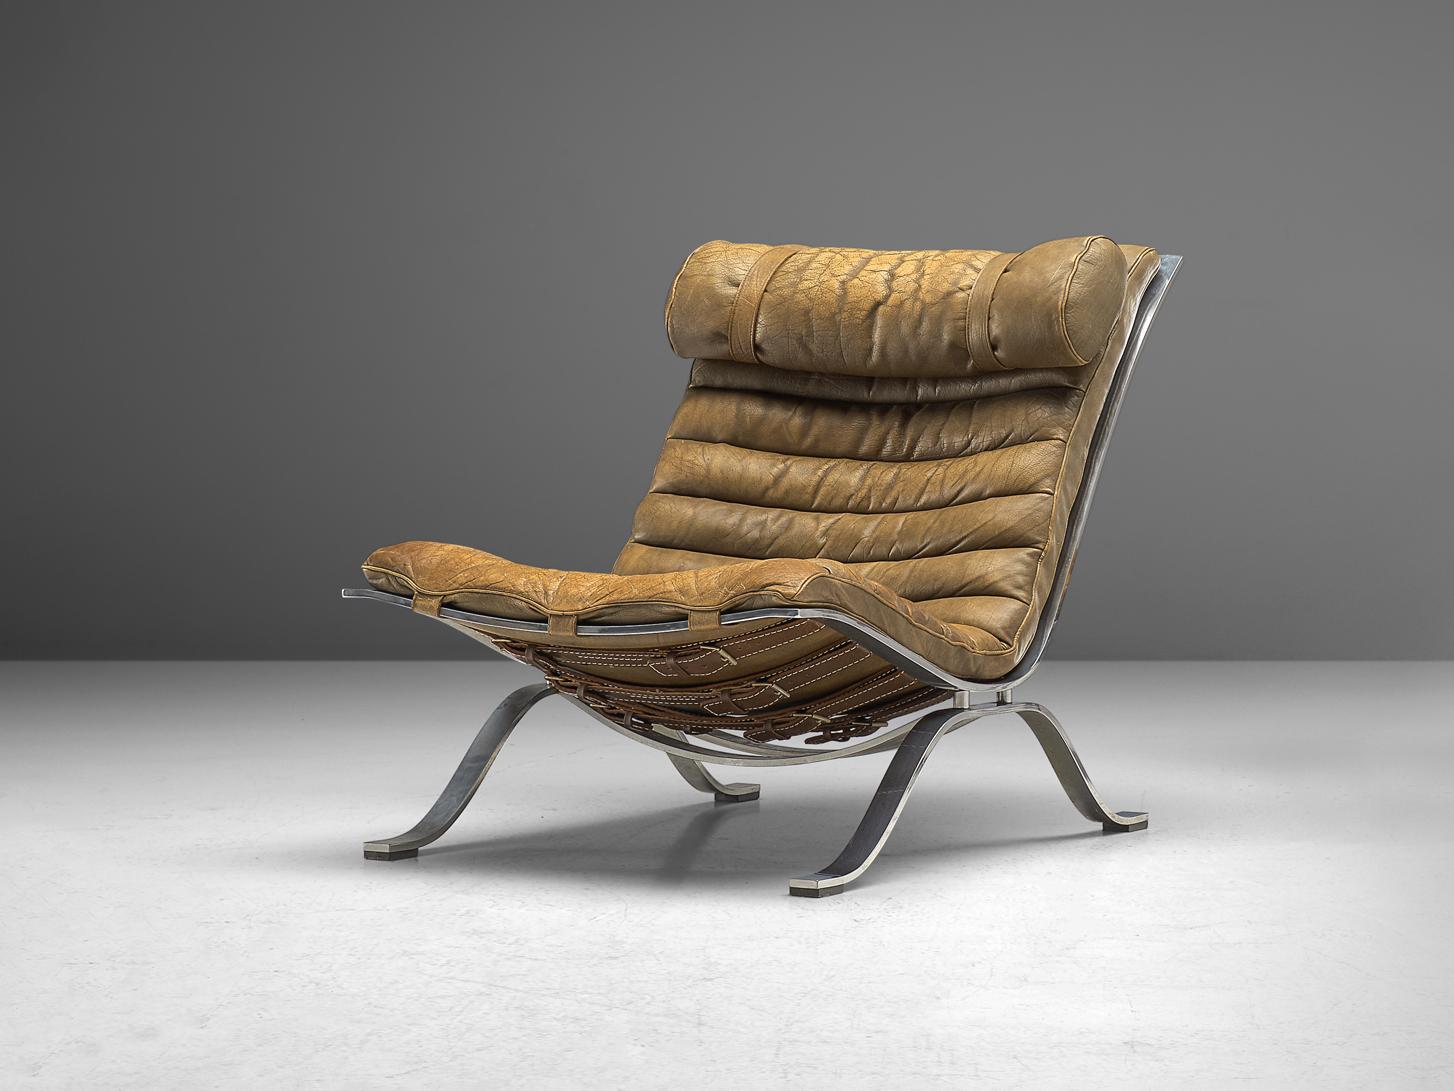 Steel Arne Norell 'Ari' Lounge Chair in Patinated Brown Leather